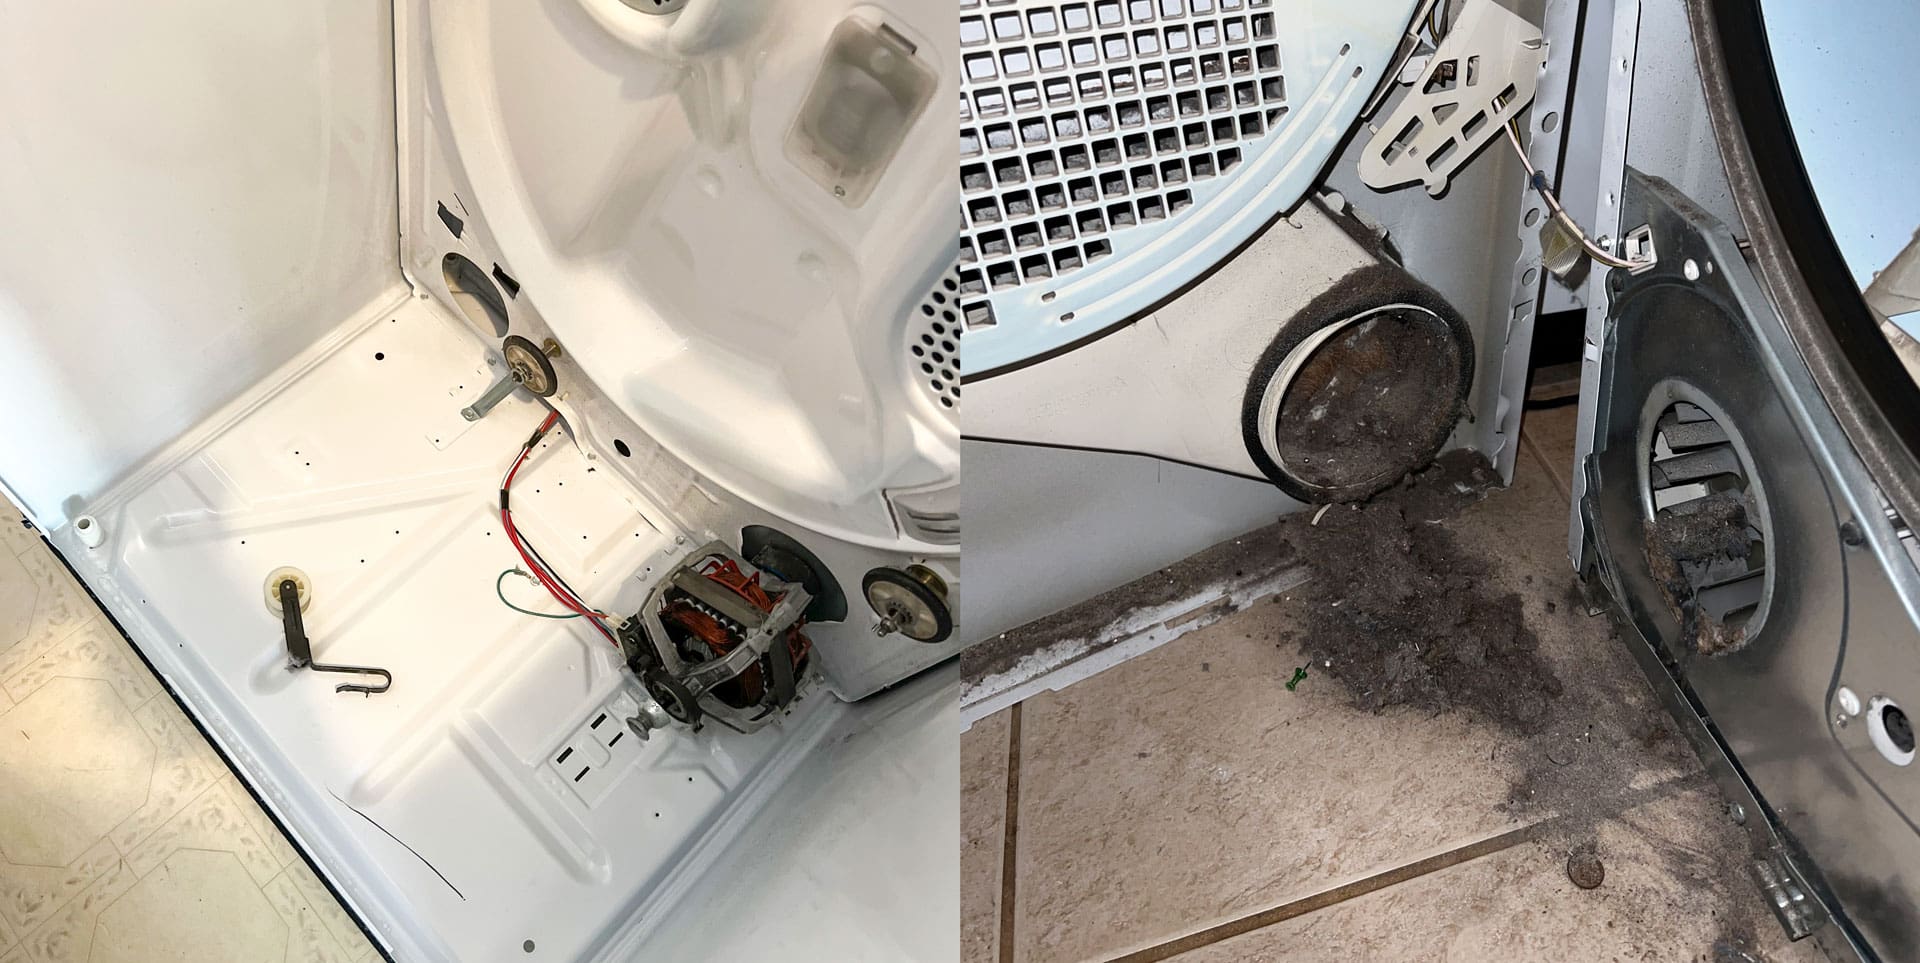 Internal Dryer Cleaning